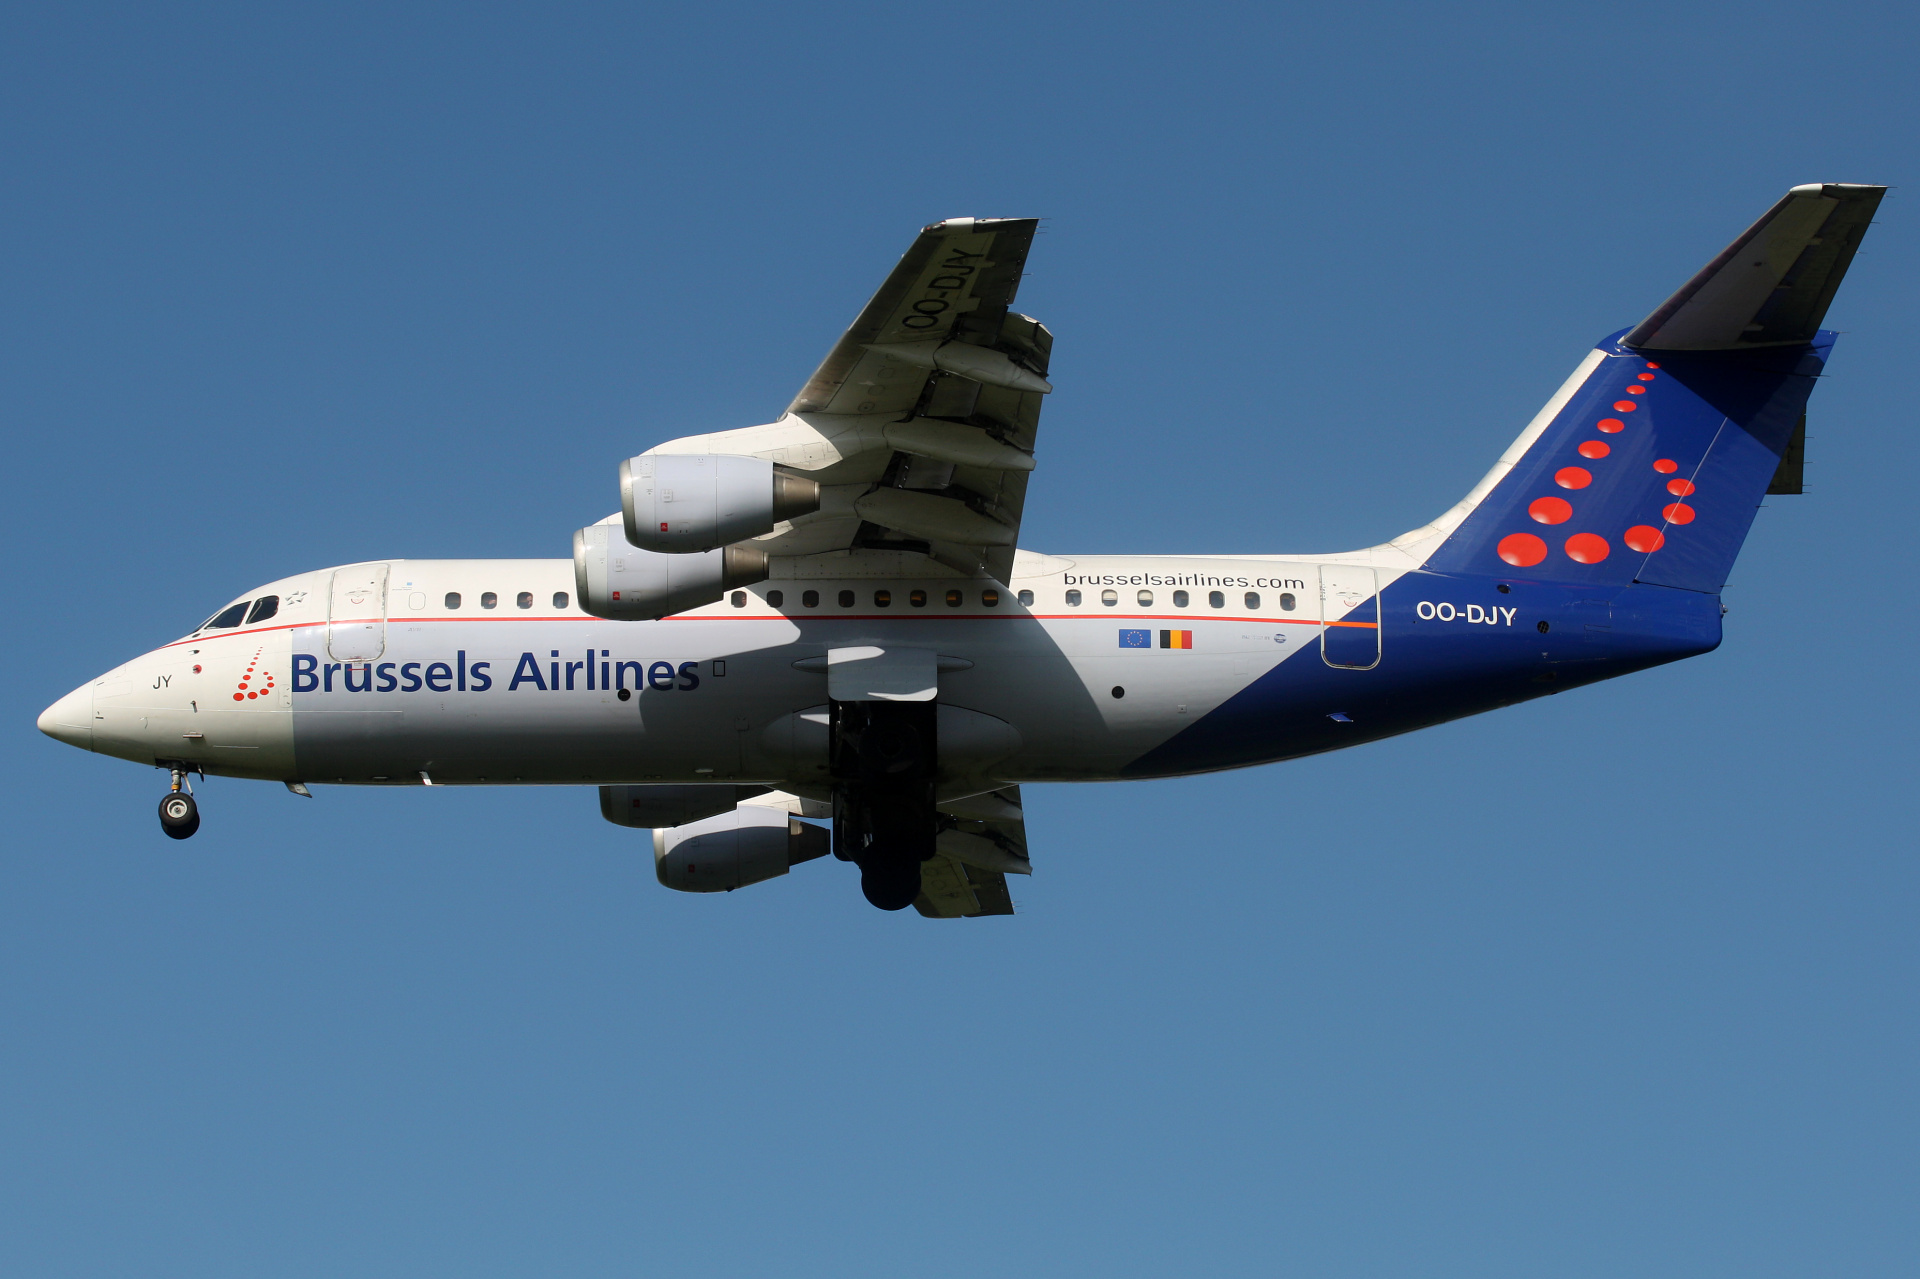 OO-DJY (Aircraft » EPWA Spotting » BAe 146 and revisions » Avro RJ85 » Brussels Airlines)